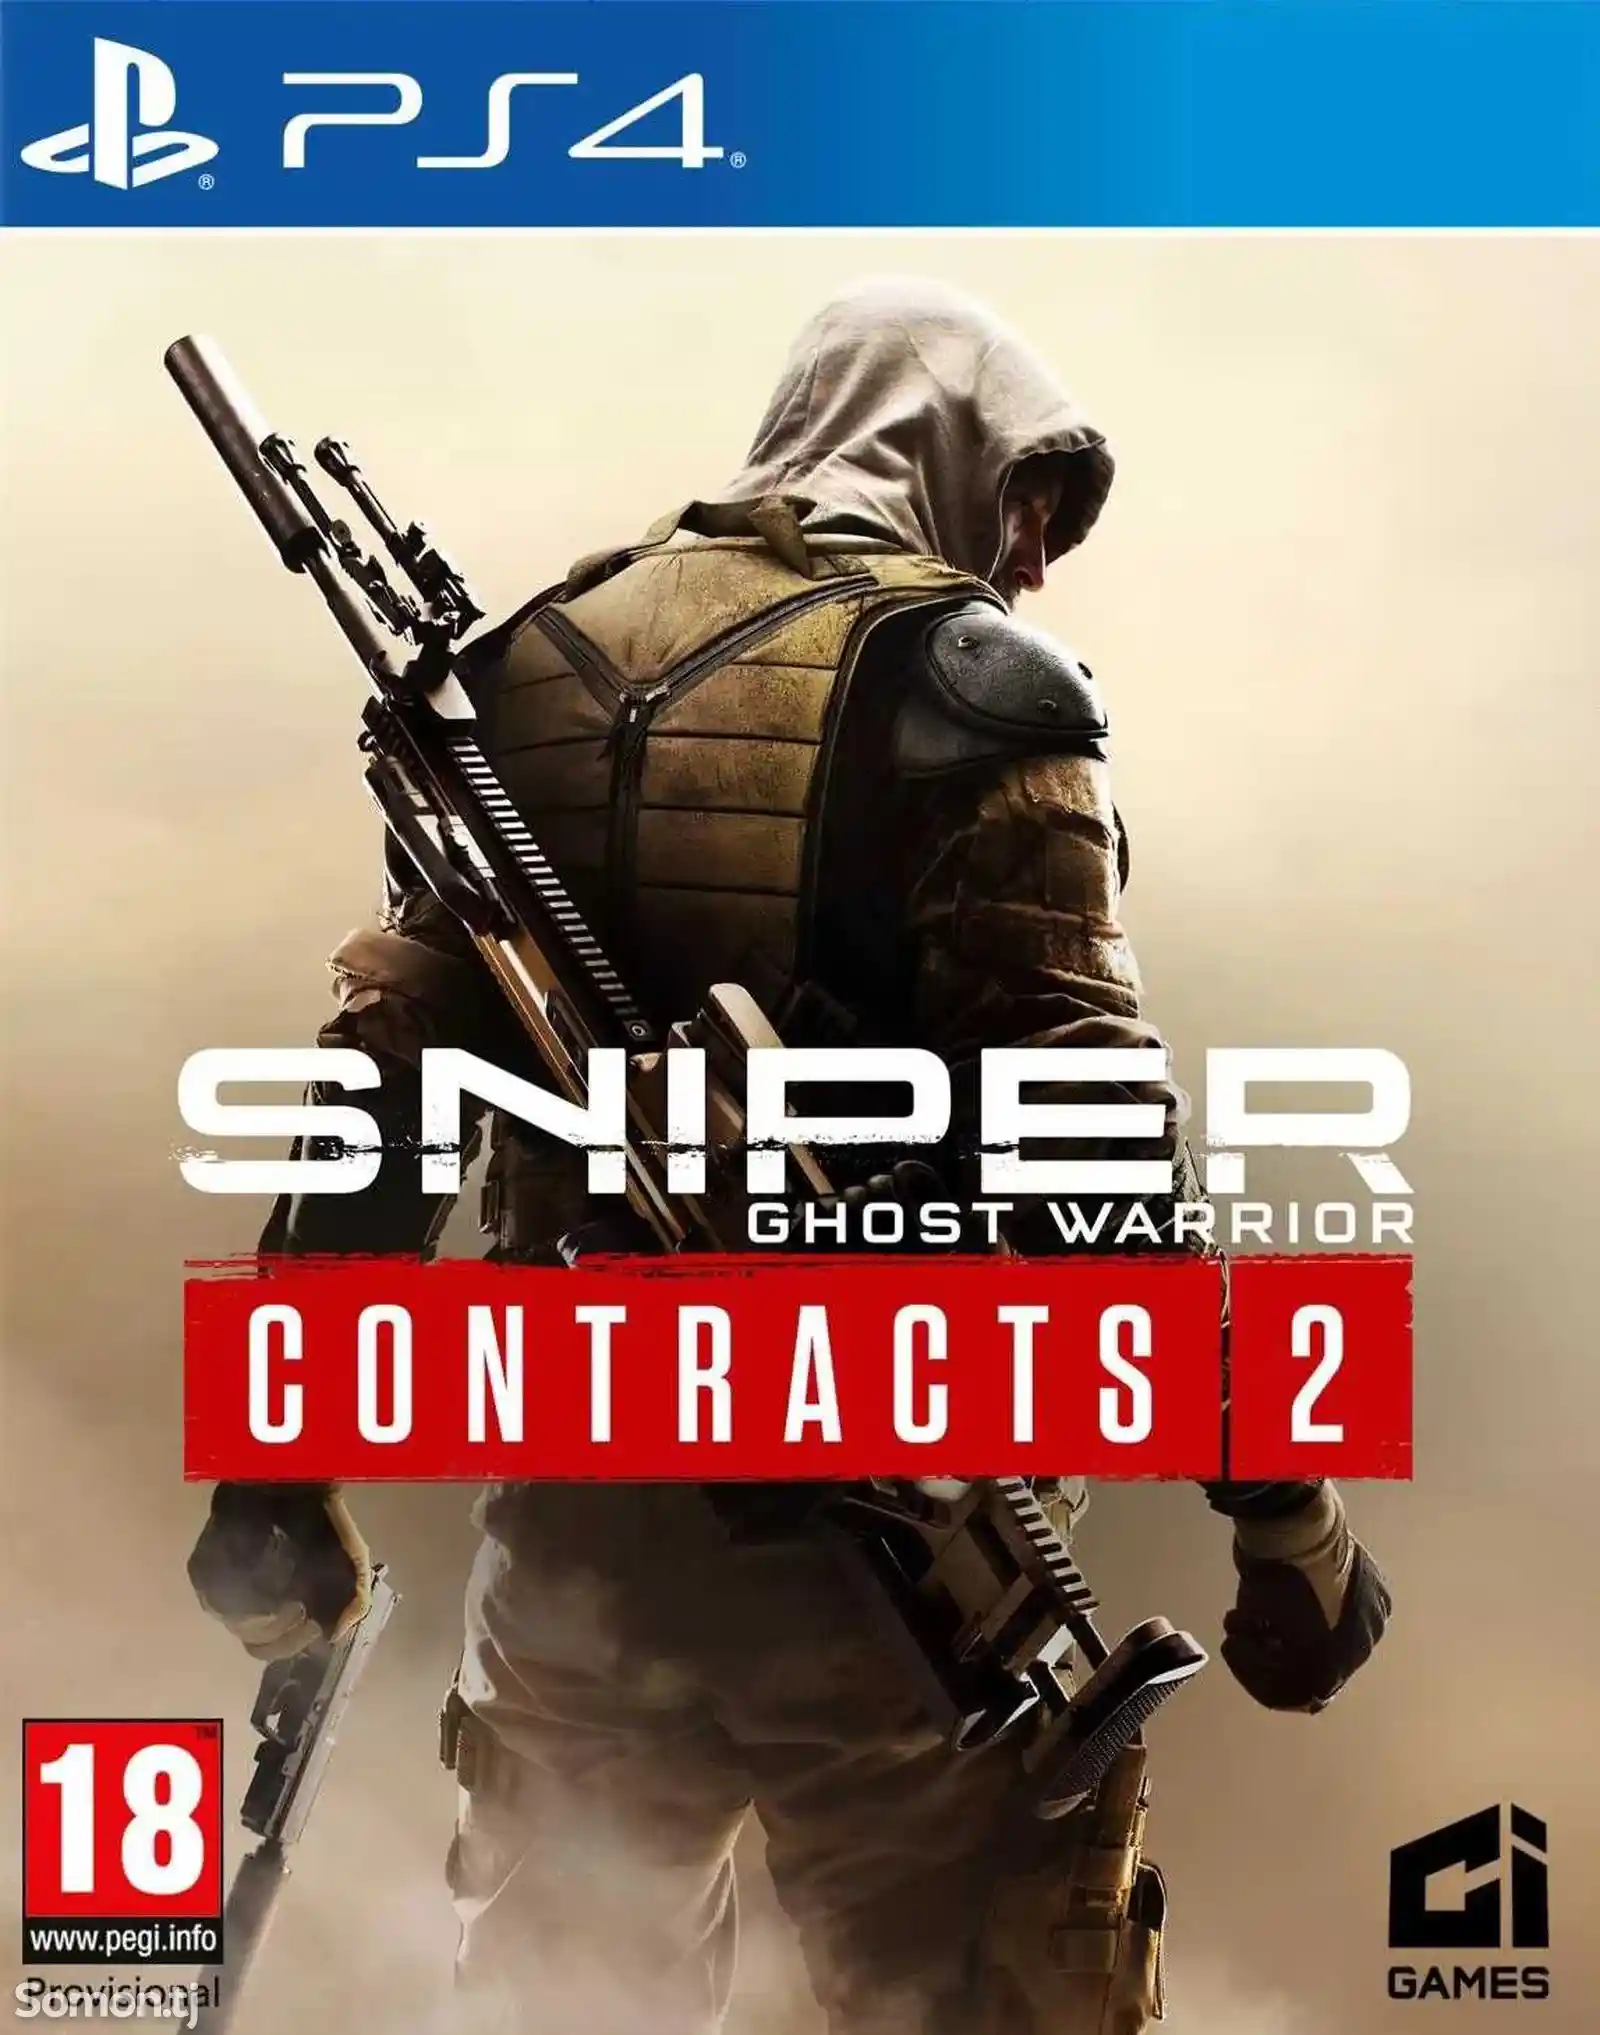 Игра Sniper Ghost Warrior Contracts для PS-4 / 6.72 / 7.02 / 7.55 / 9.00 /-1